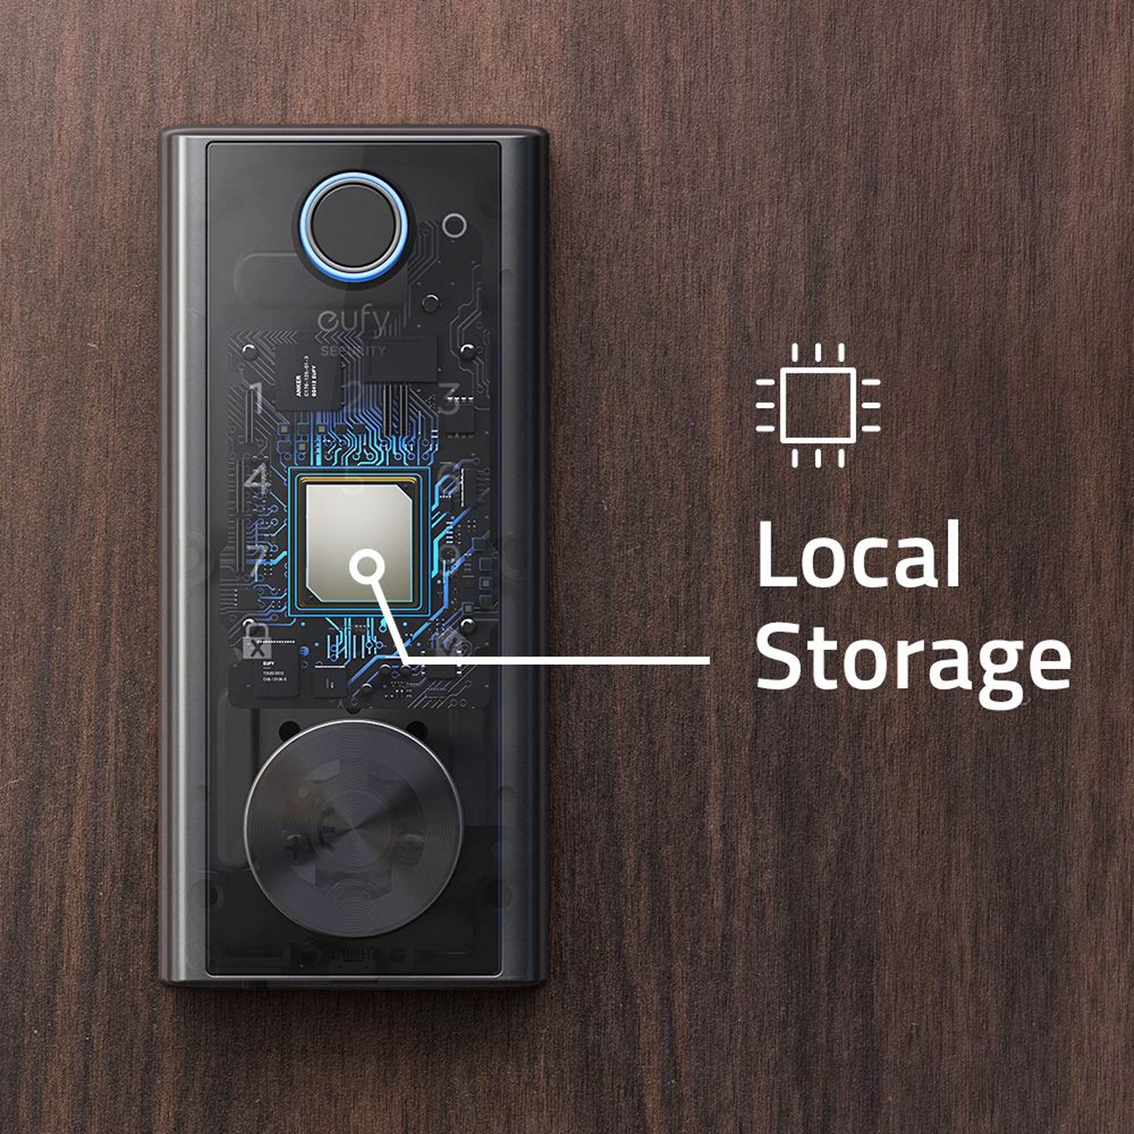 Eufy Touch and Wifi Smart Lock - Image 8 of 10